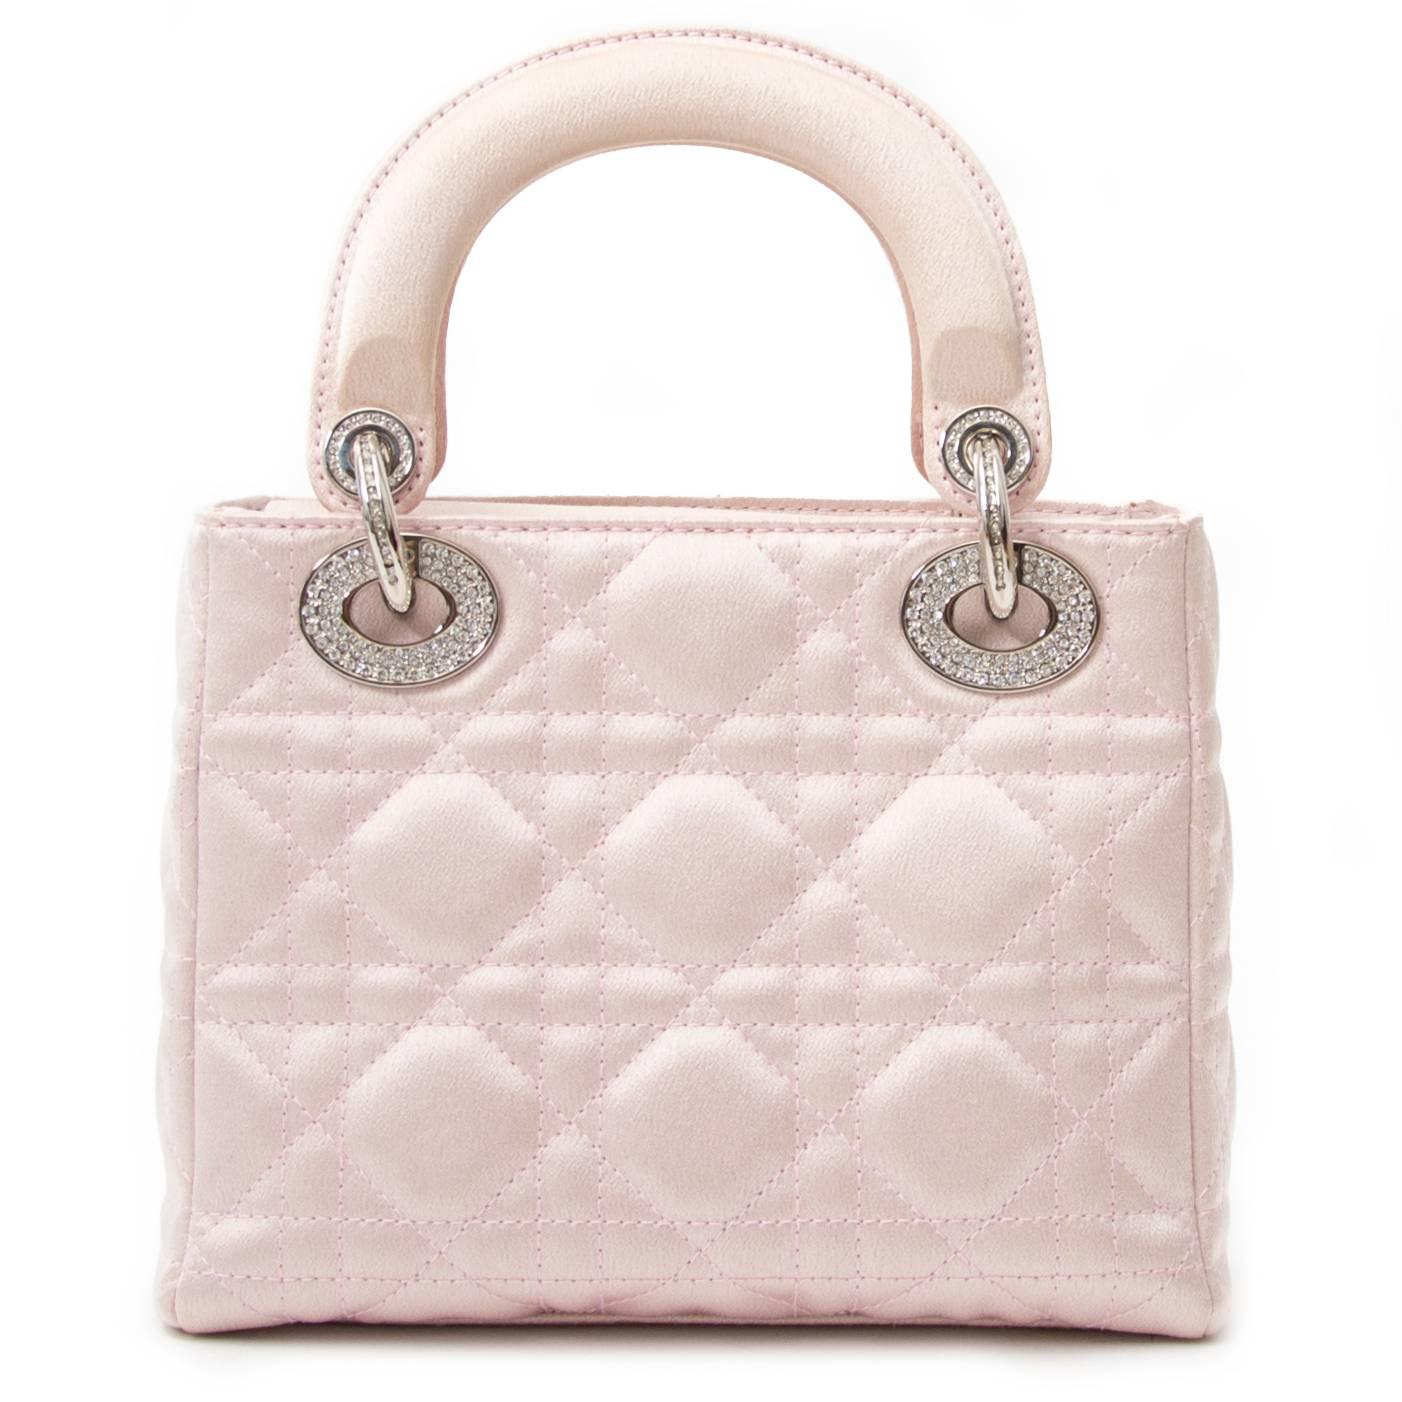 This petite Christian Dior Satin Swarovski Crystal Cannage Mini Lady Dior is a sight to be seen. The Swarovski crystal embellishments all over the hardware are divine. This bag is to be carried by hand. In good condition.